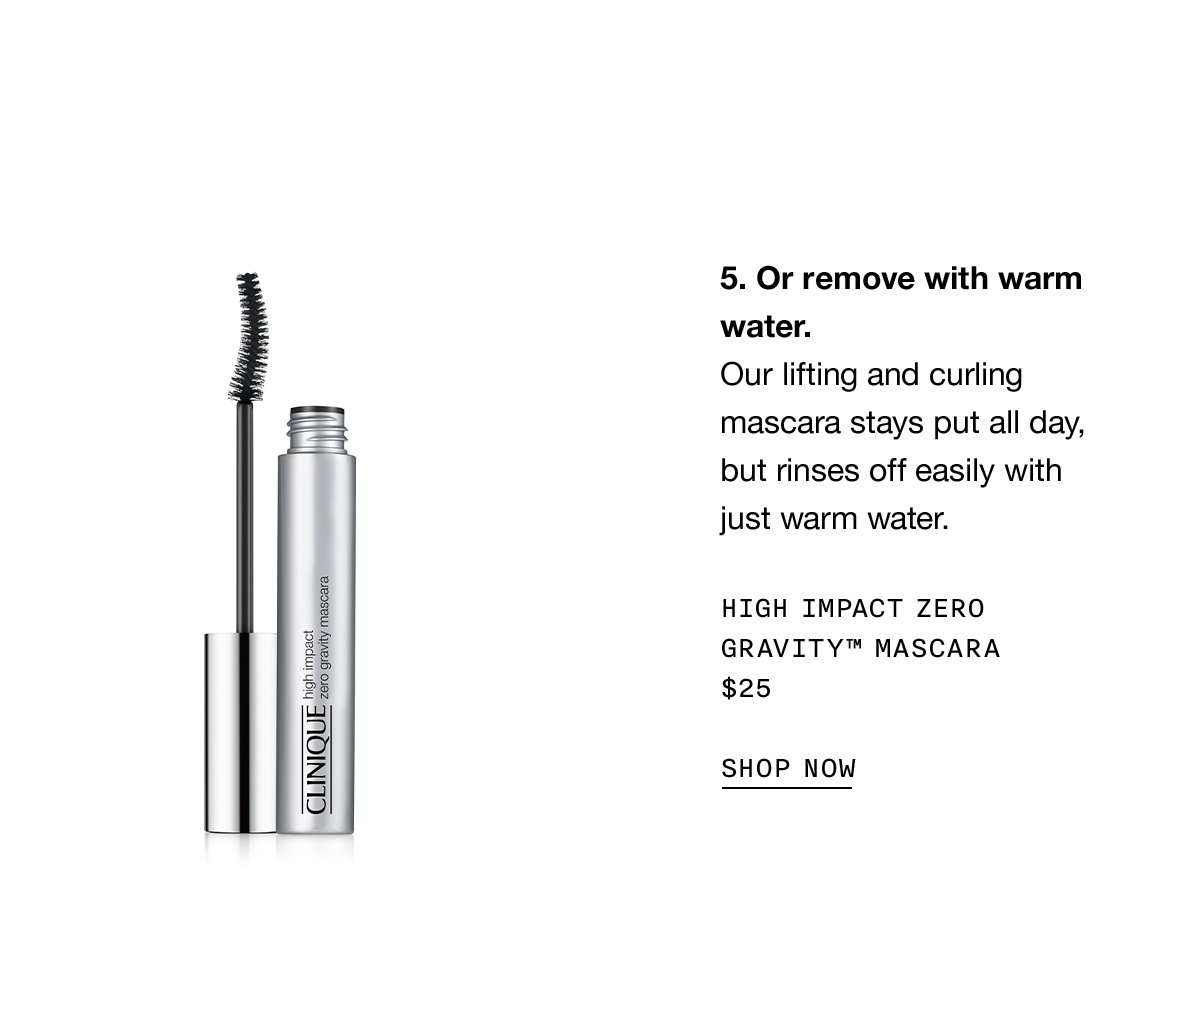 5. Or remove with warm water. Our lifting and curling mascara stays put all day, but rinses off easily with just warm water. High Impact Zero Gravity Mascara $25 SHOP NOW